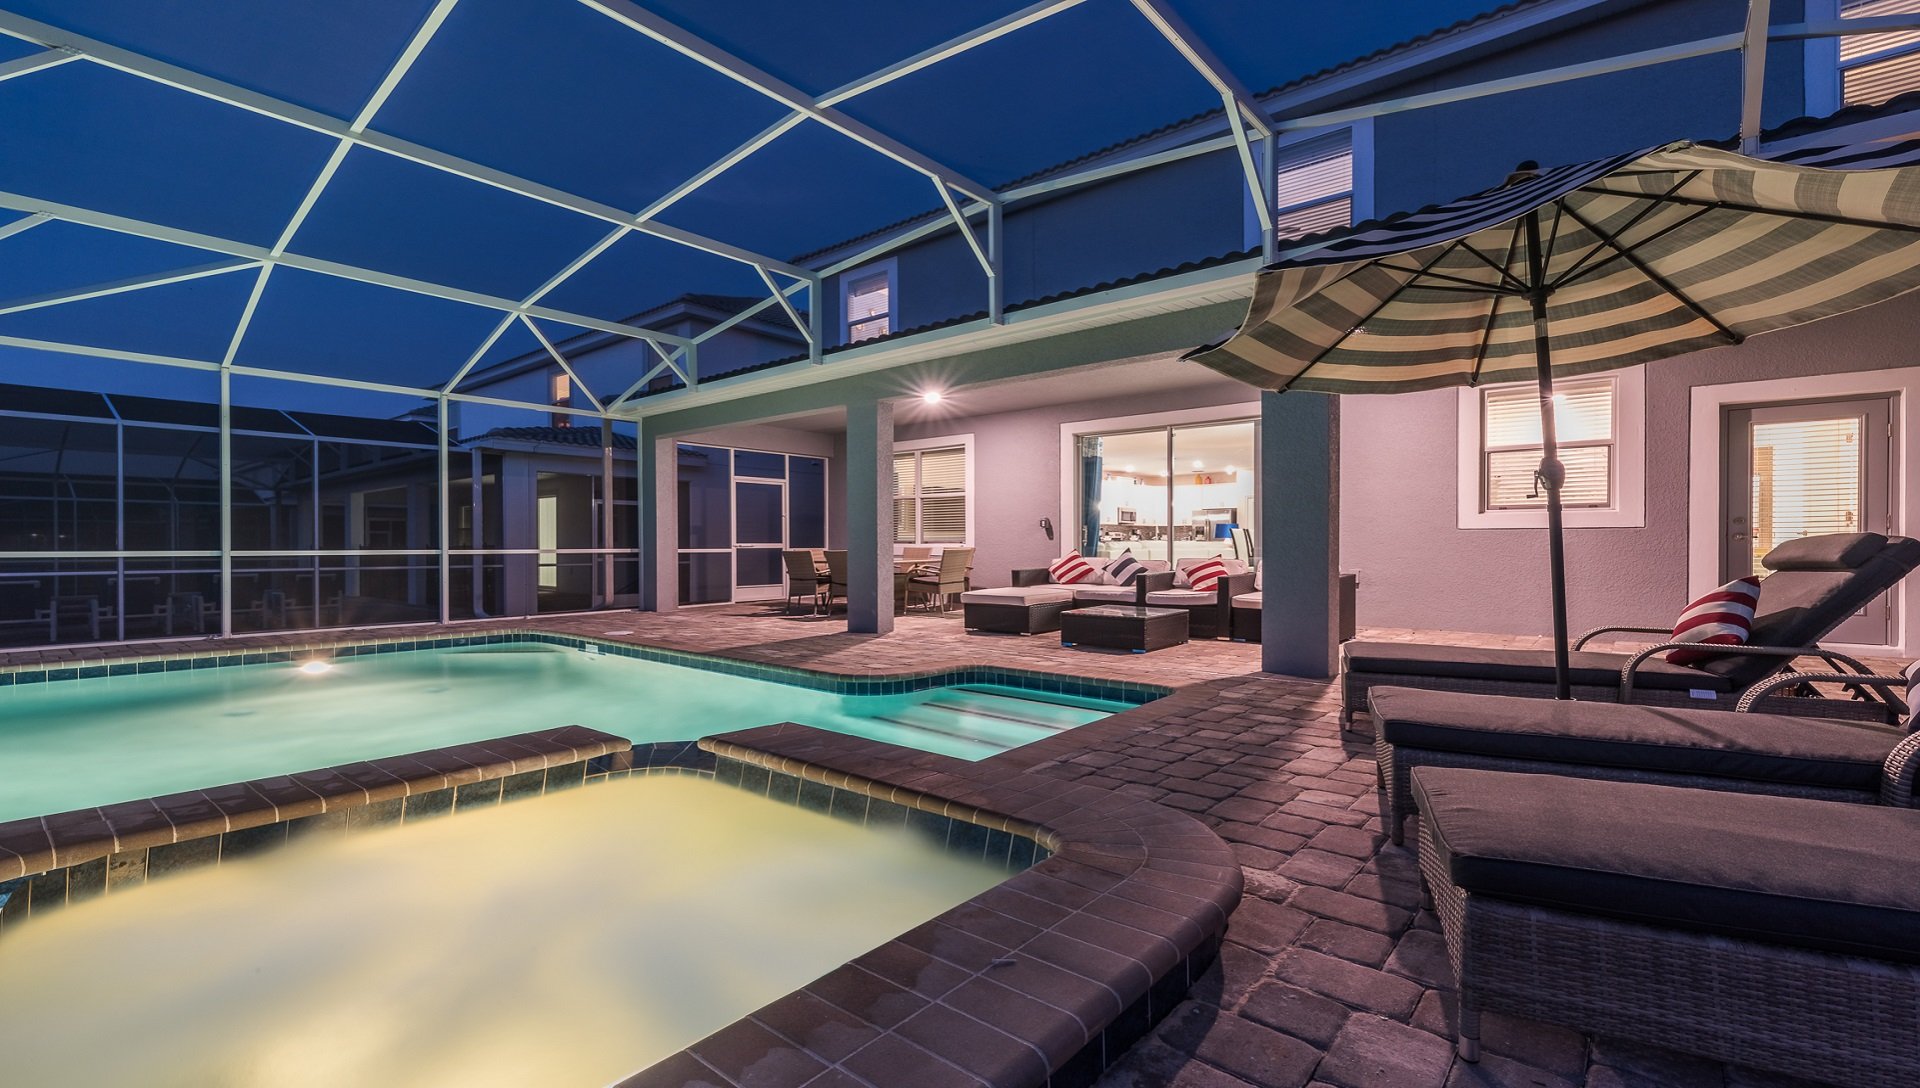 You'll have the screened in spa and pool all to yourself